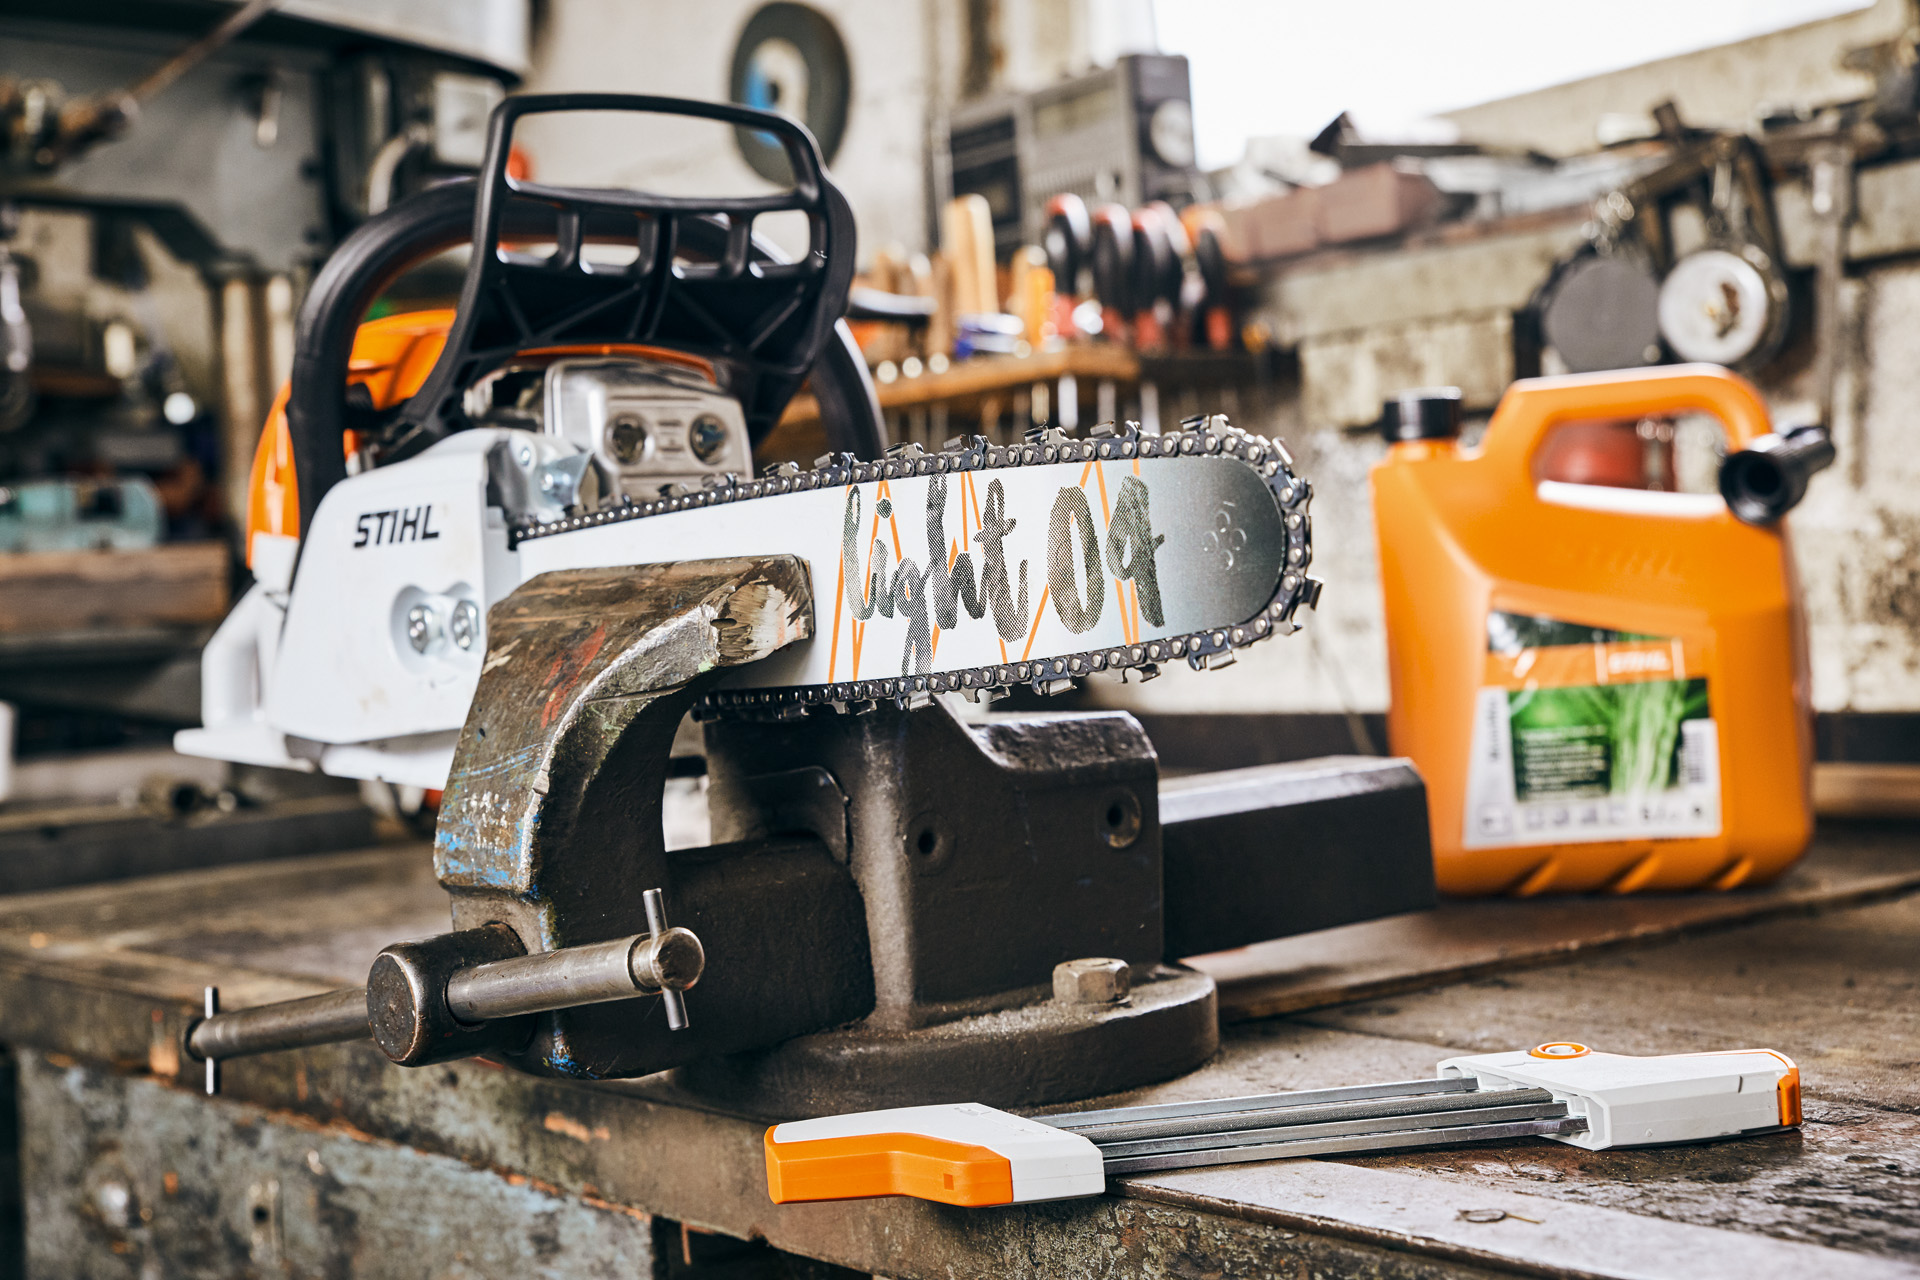 A STIHL MS 261 C-M petrol chainsaw with Light 04 guide bar clamped to a workbench, and bottle of STIHL MotoMix behind it